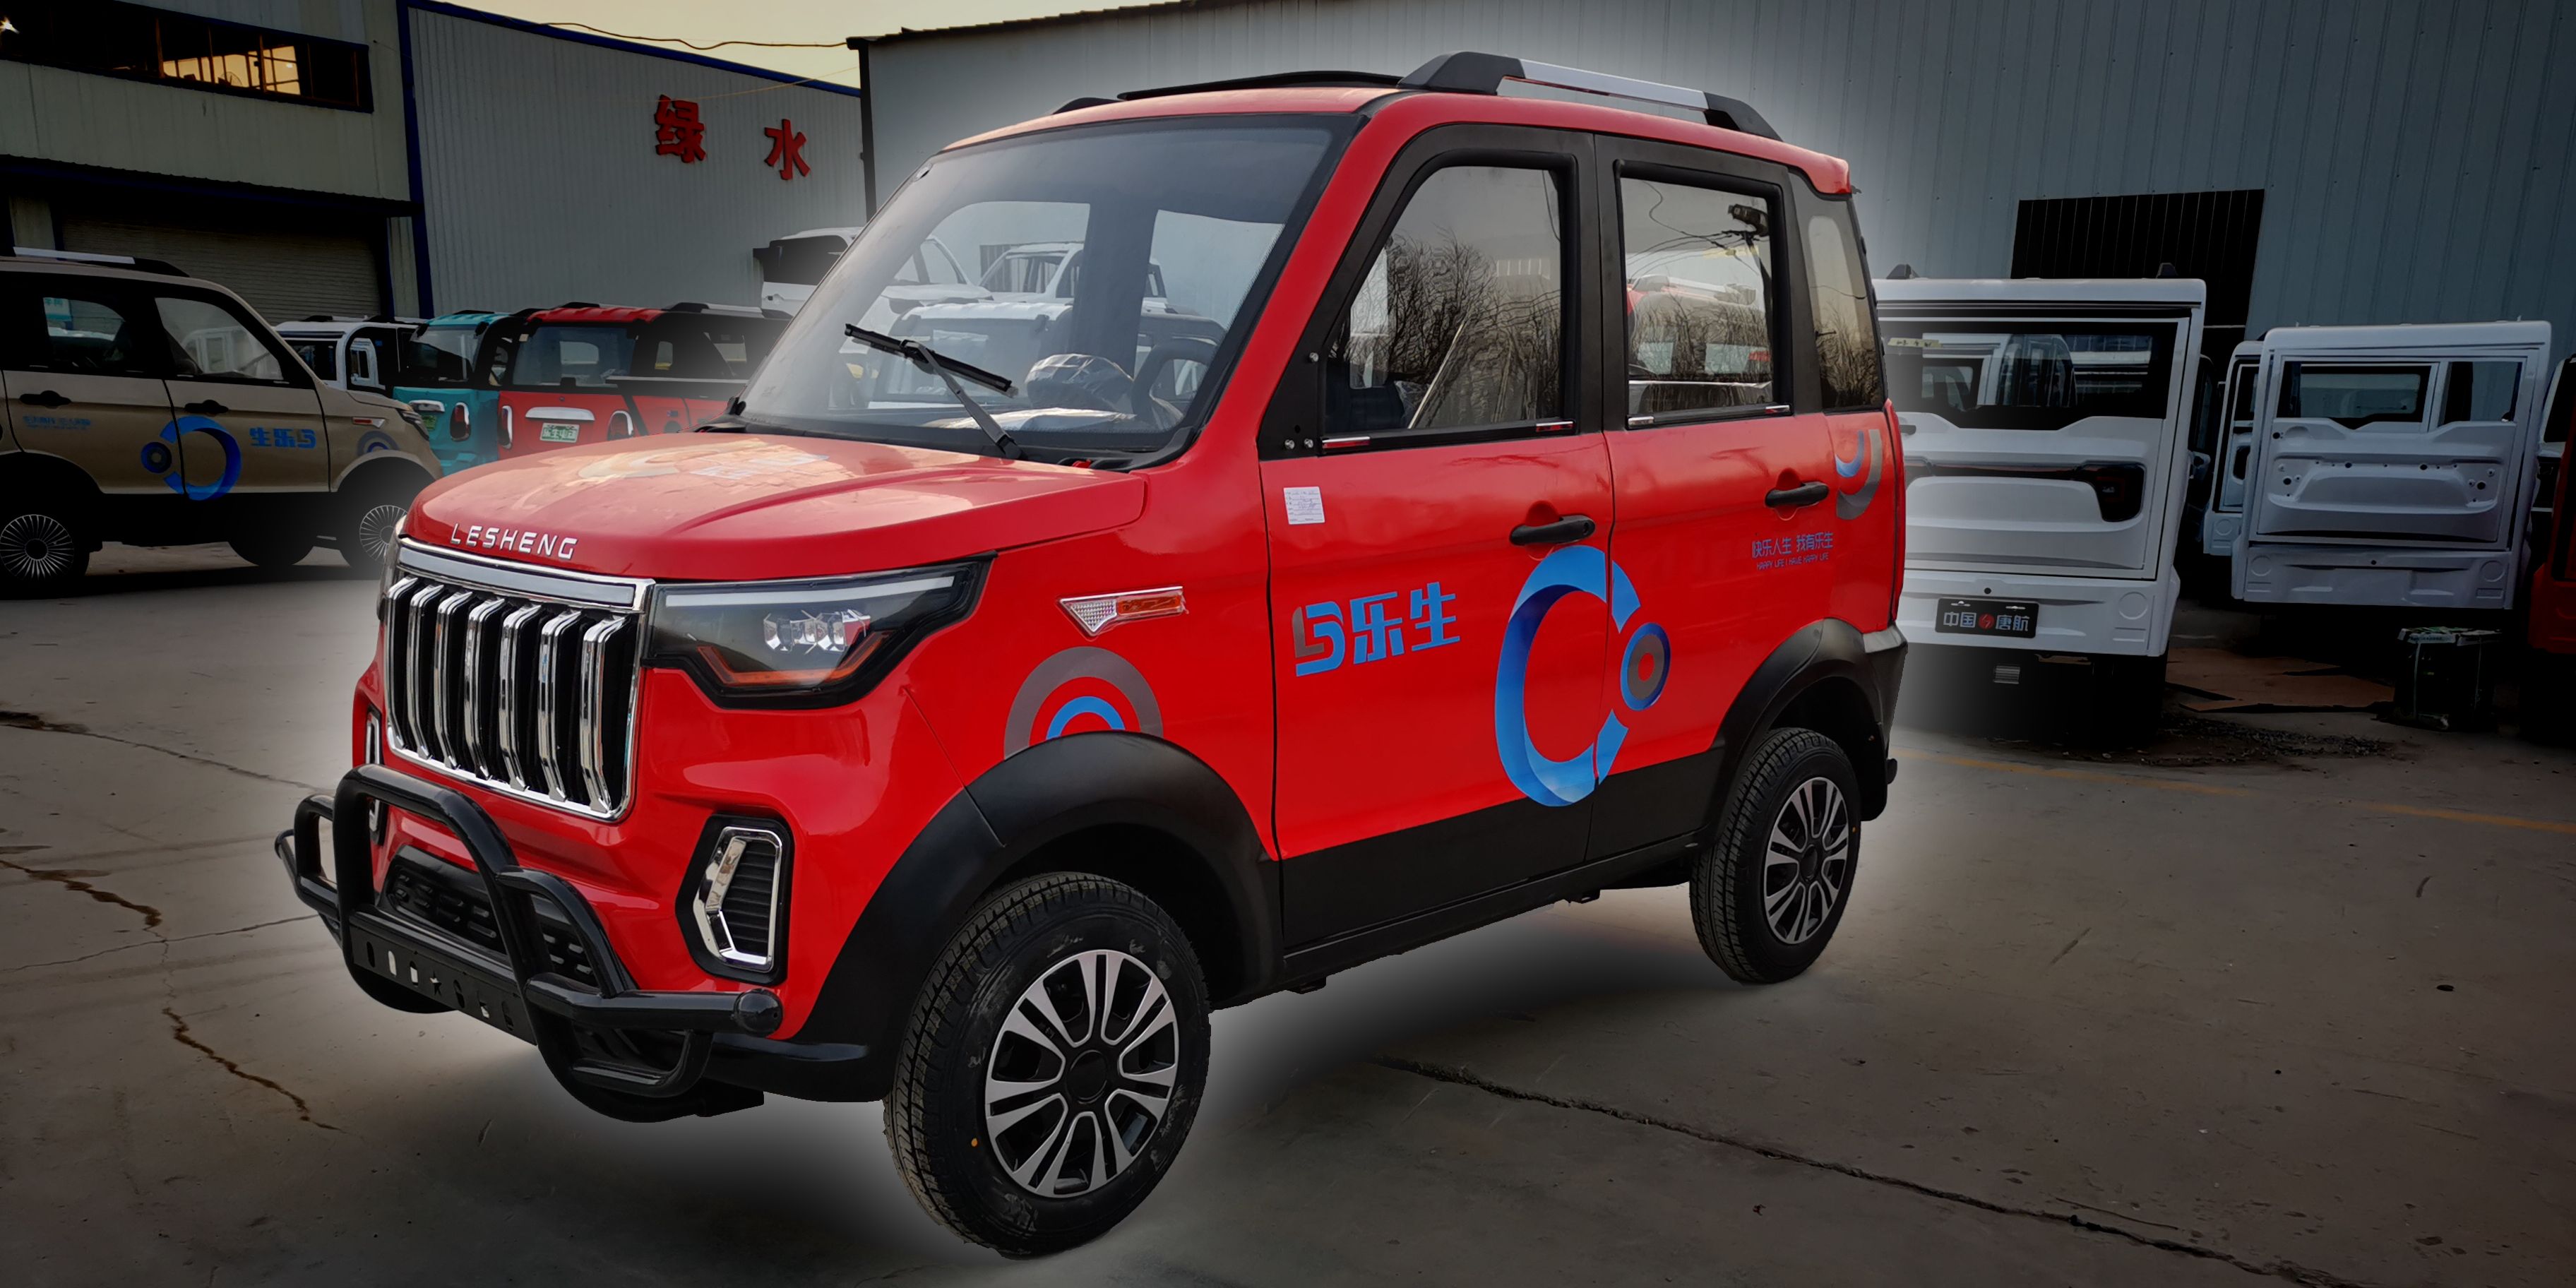 Awesomely Weird Alibaba EV of the Week a 3,200 electric SUV